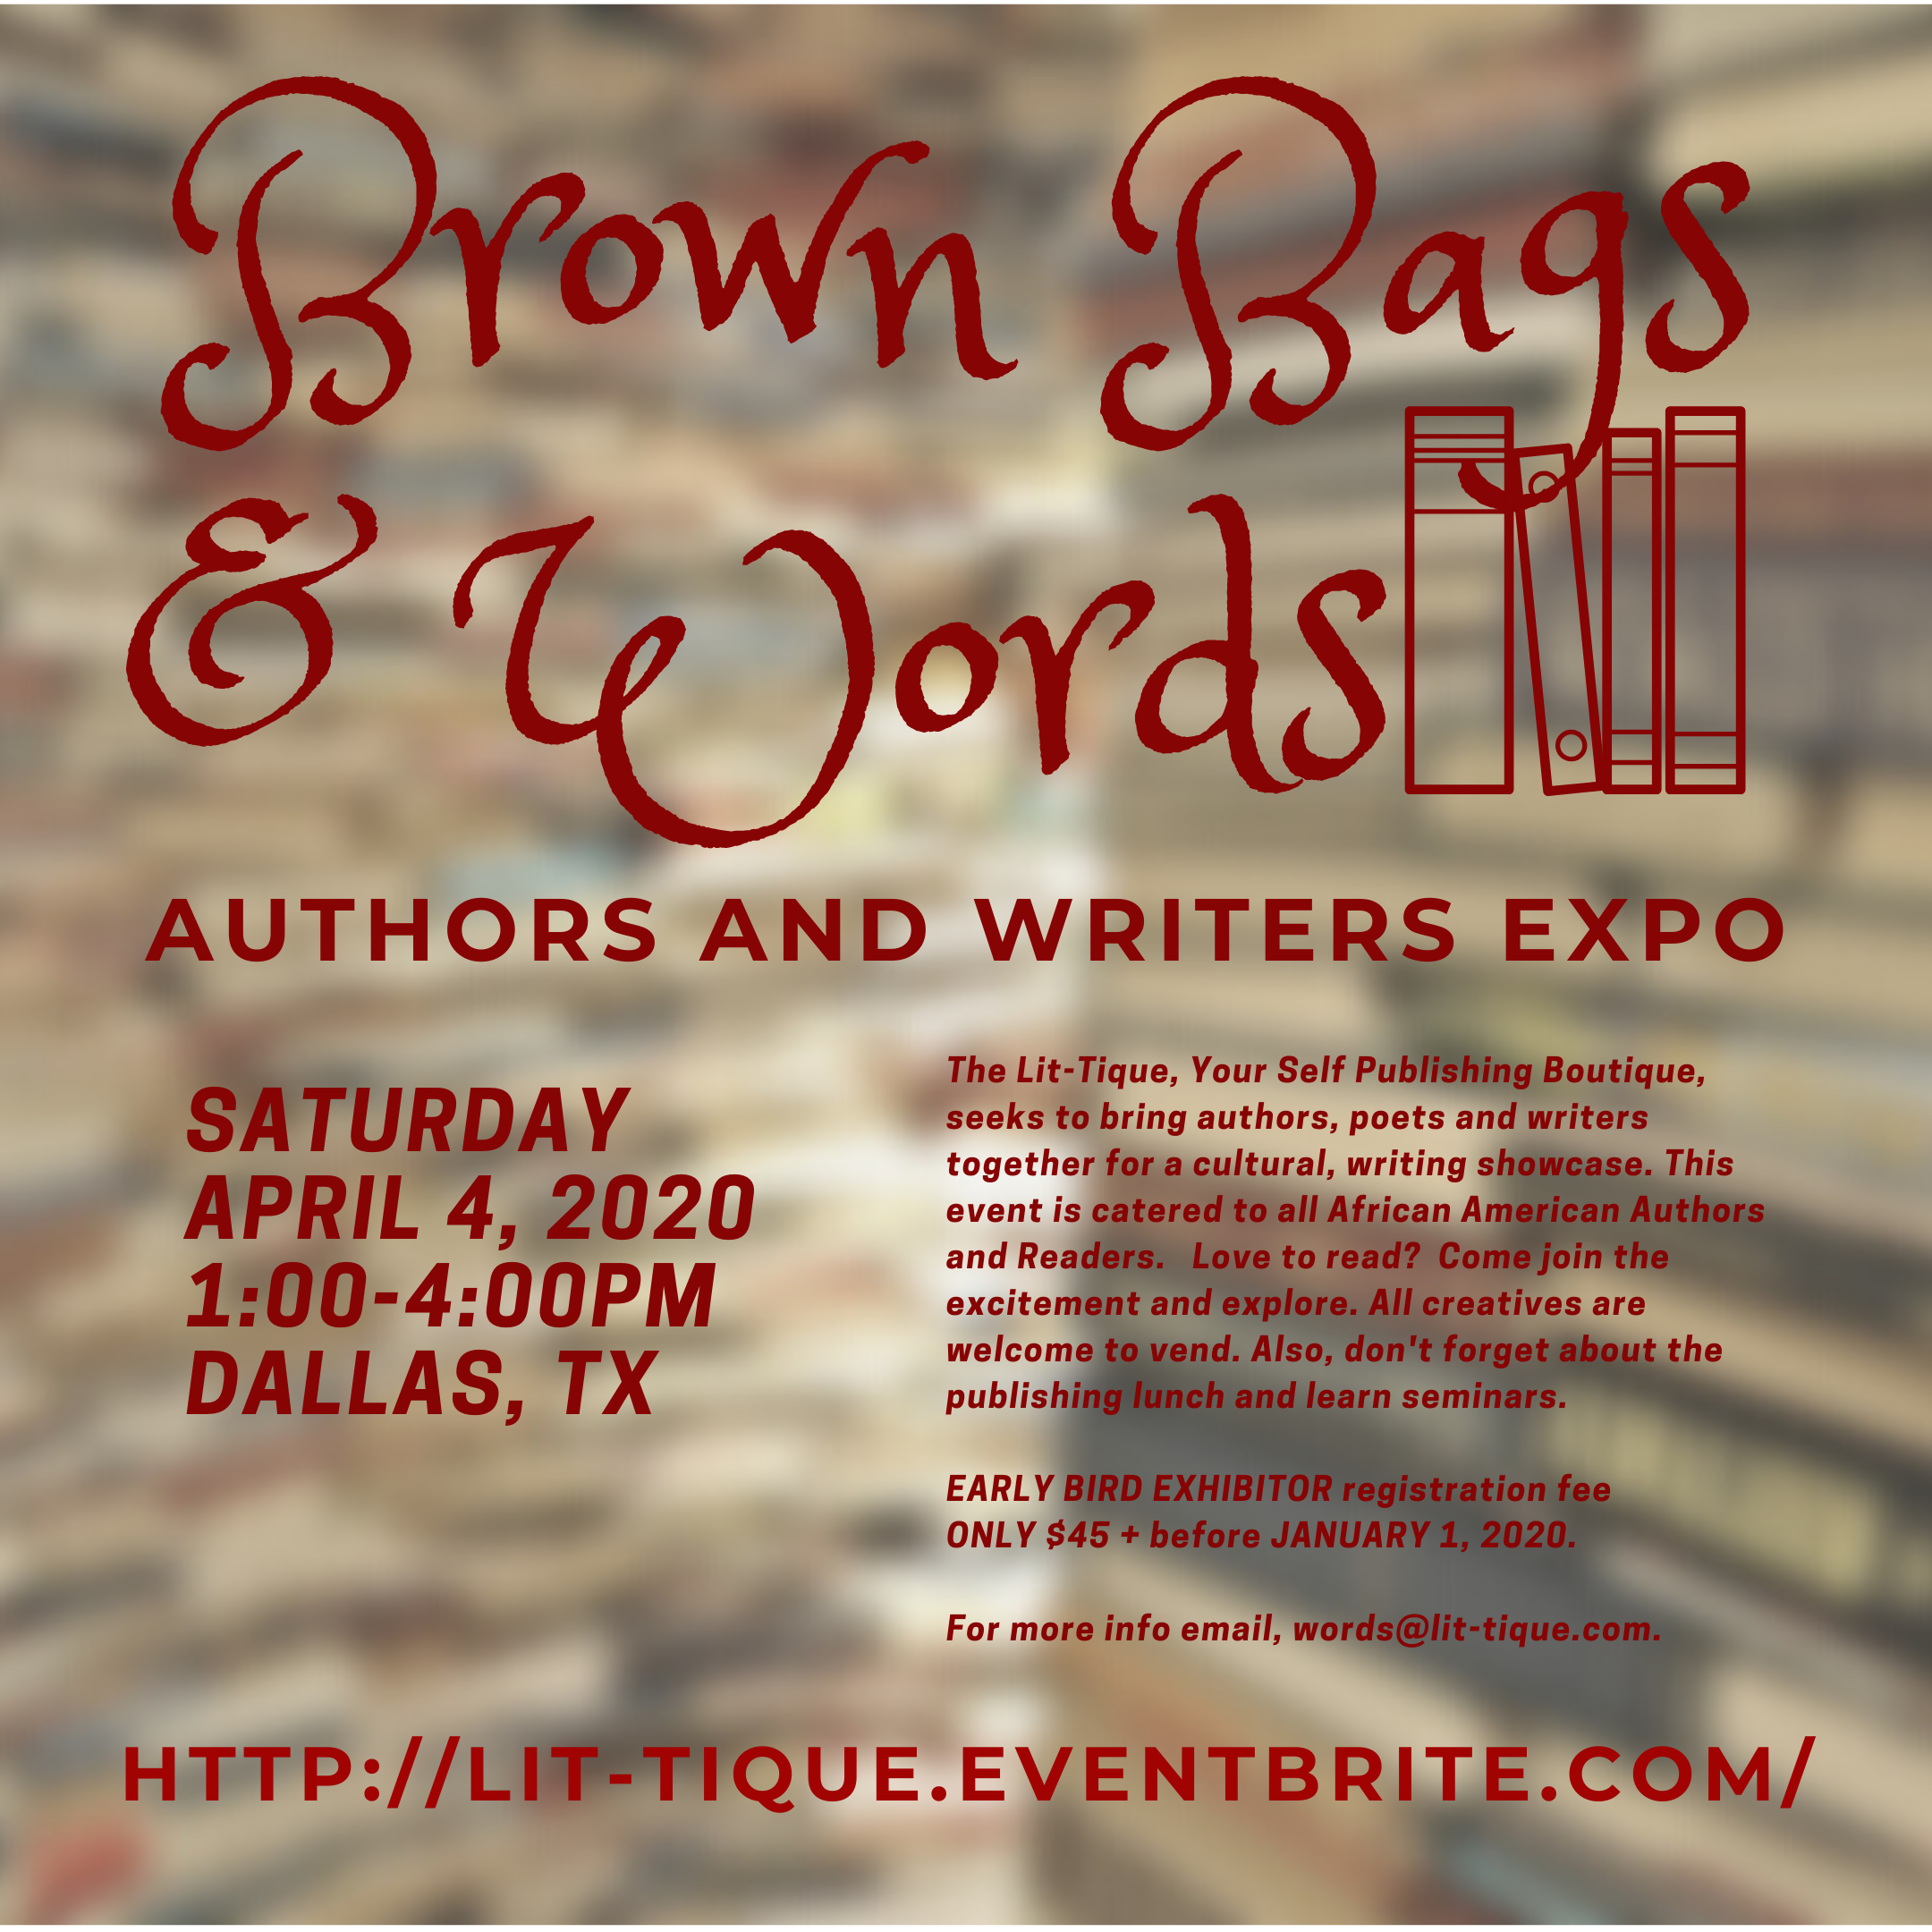 Brown Bags and Words: Authors and Writers Expo